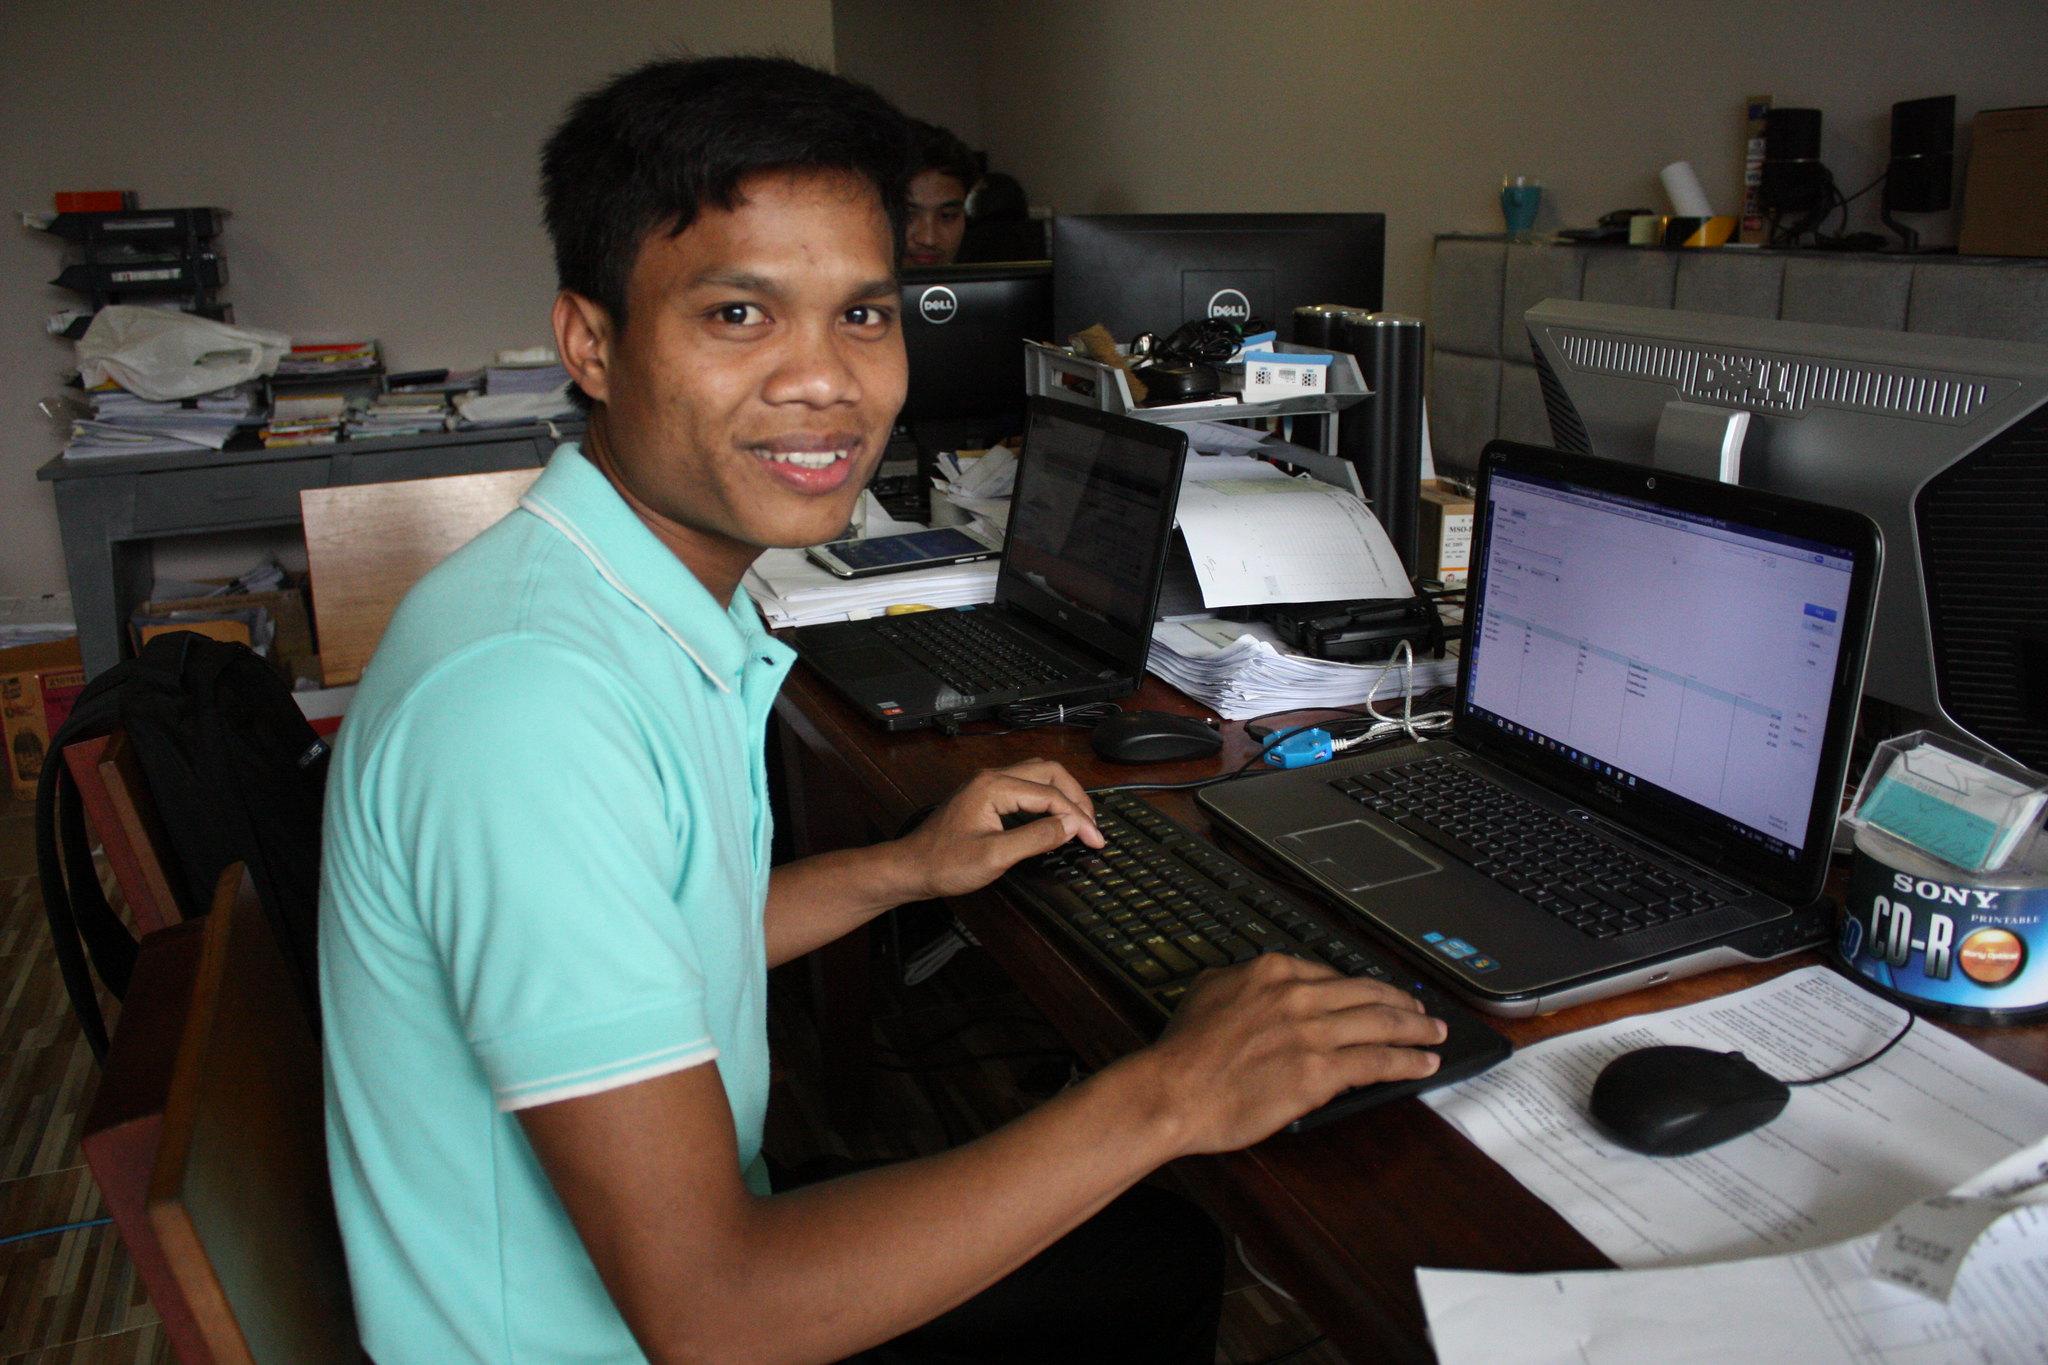 The access to Internet access allows for finding jobs for youth in Cambodia. 